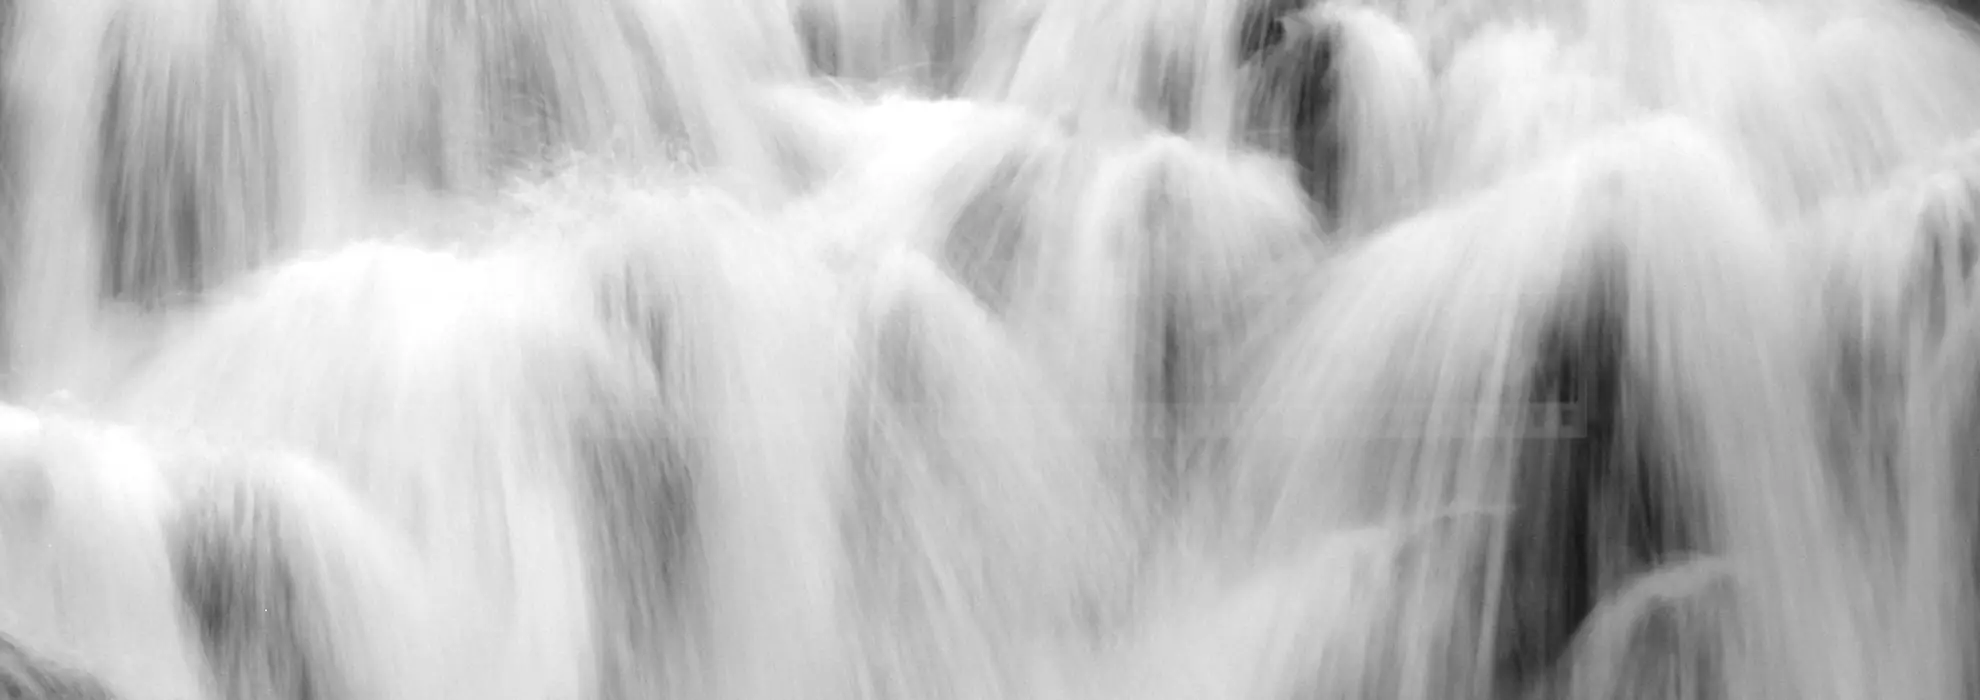 Abstract photograph of the waterfall